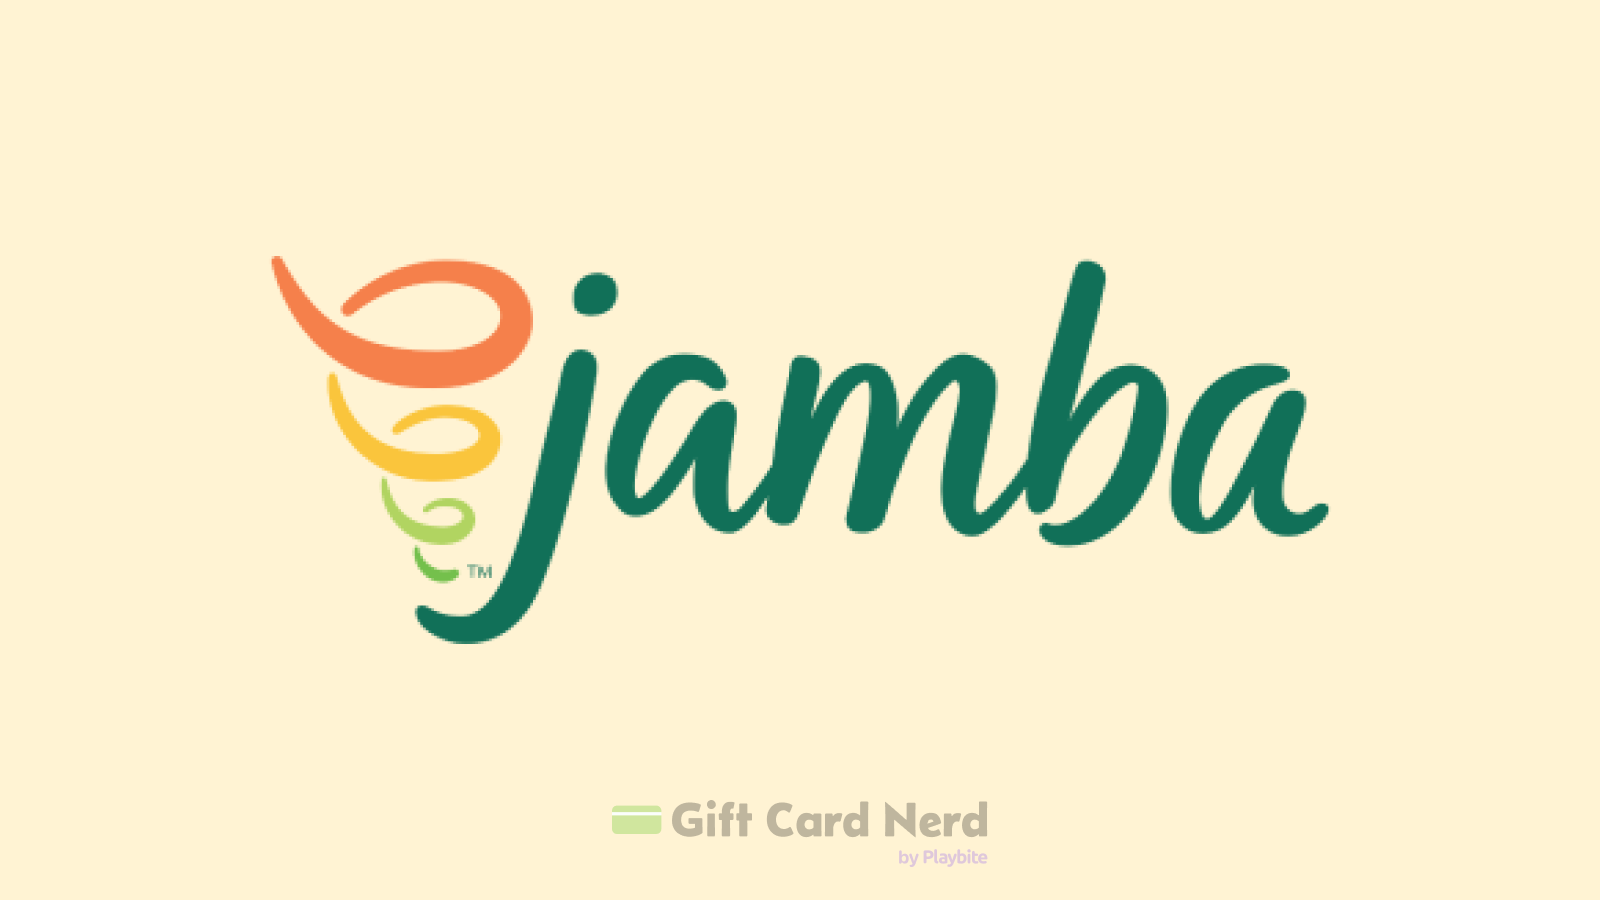 How to Check Your Jamba Juice Gift Card Balance